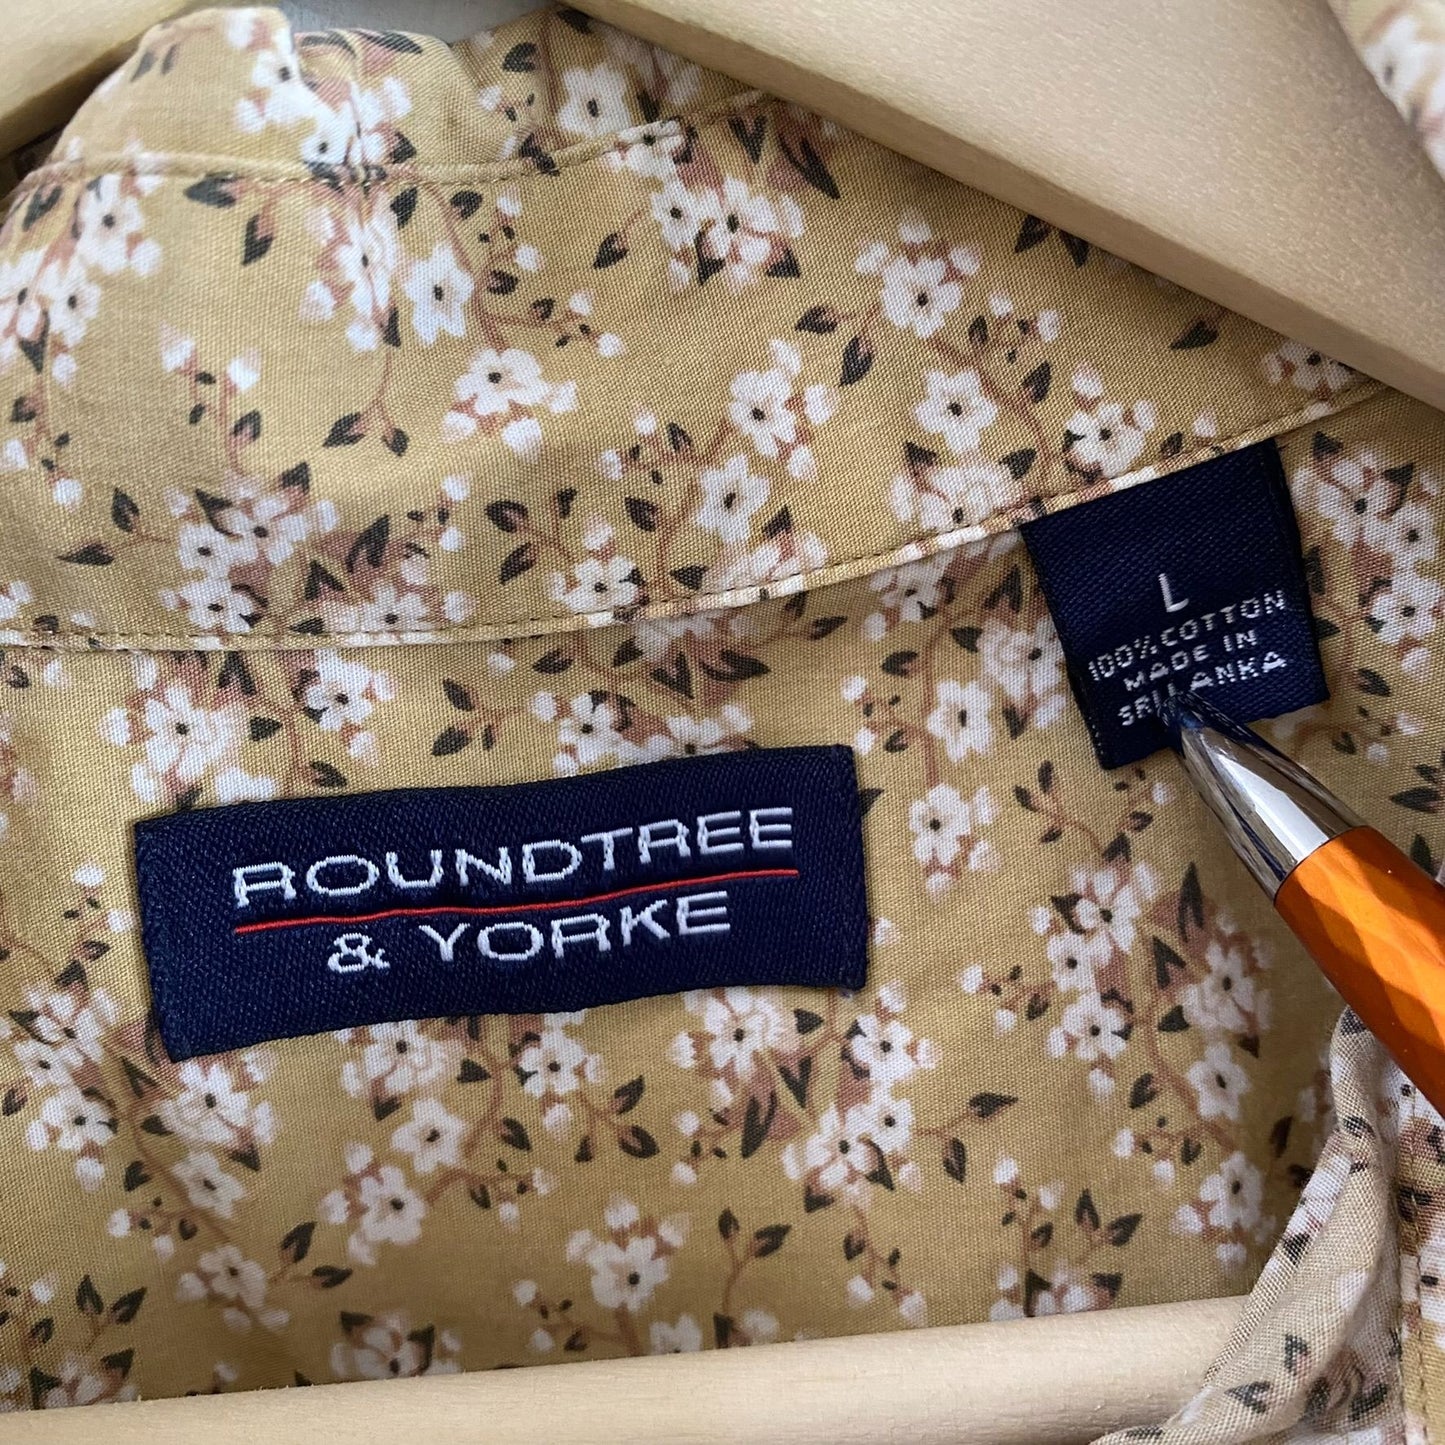 Roundtree & Yorke Floral S/S Shirt